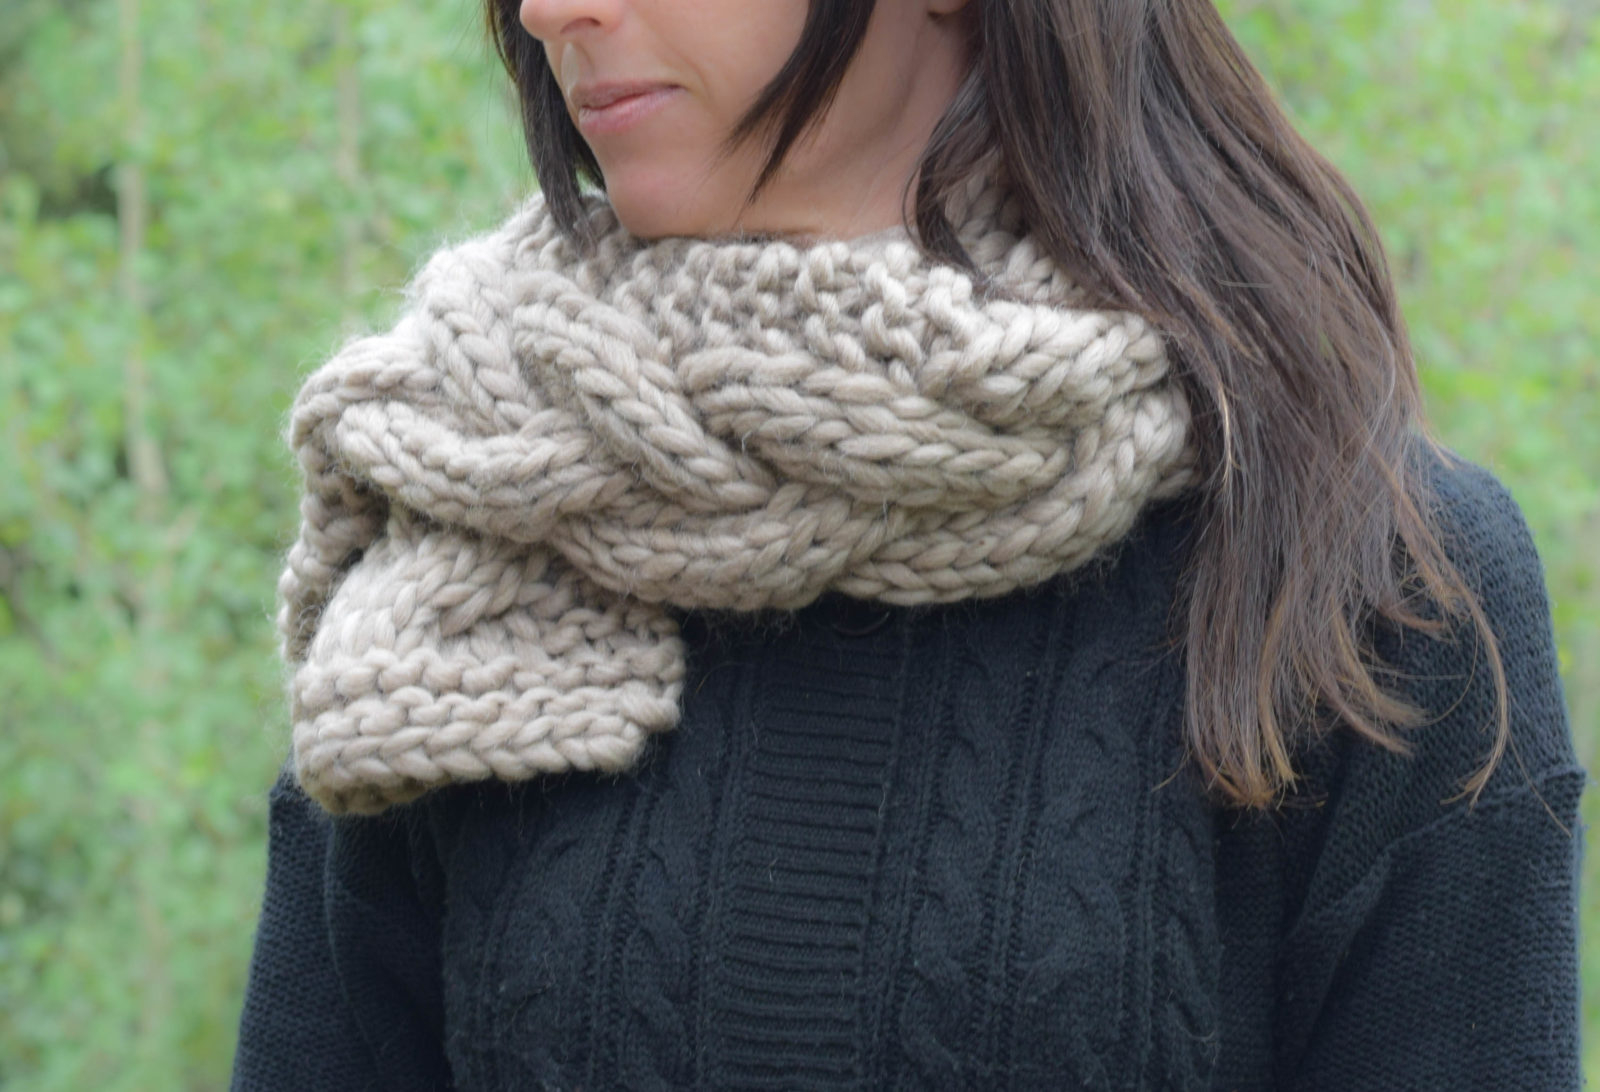 Knitted Cable Scarf Patterns The Cascades Knit Scarf Mama In A Stitch